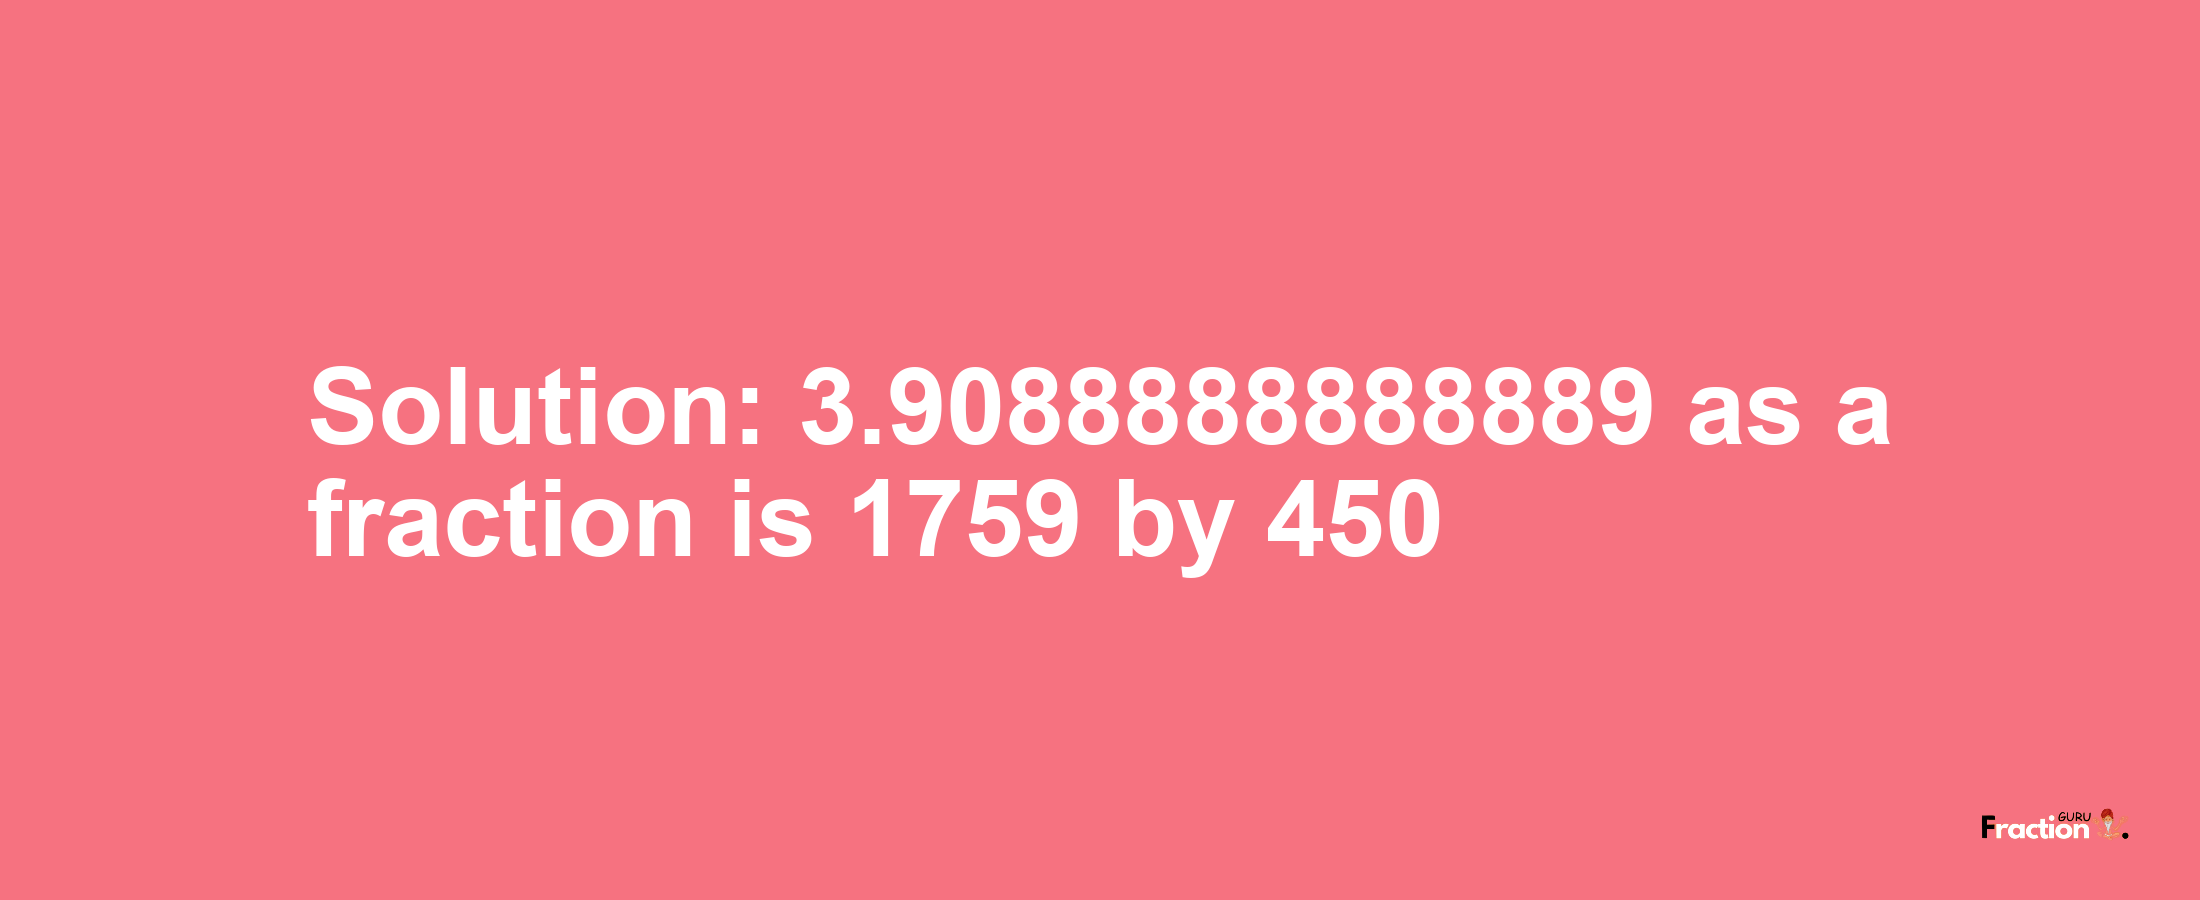 Solution:3.9088888888889 as a fraction is 1759/450